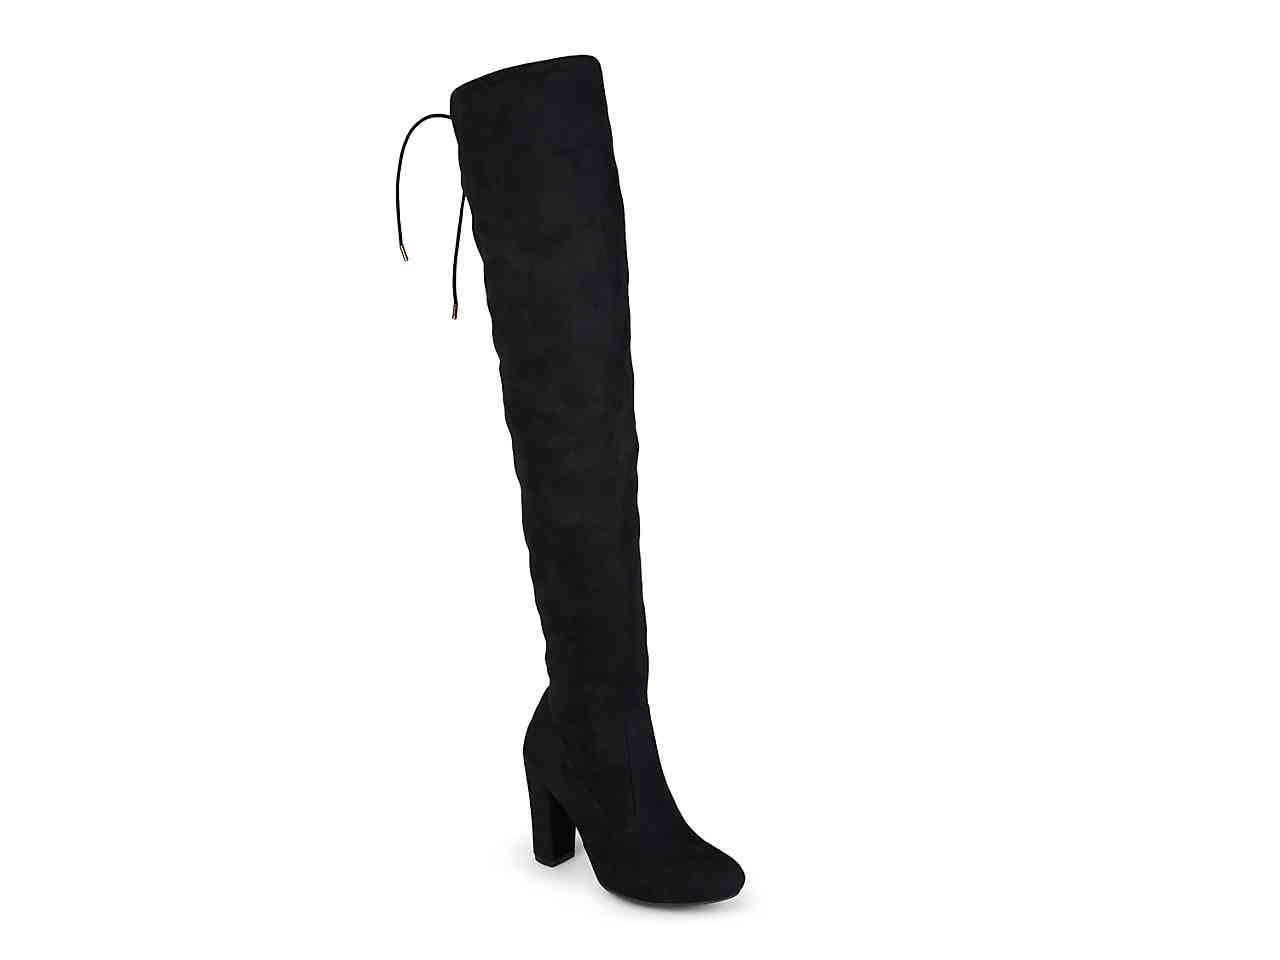 thigh high boots that stay up